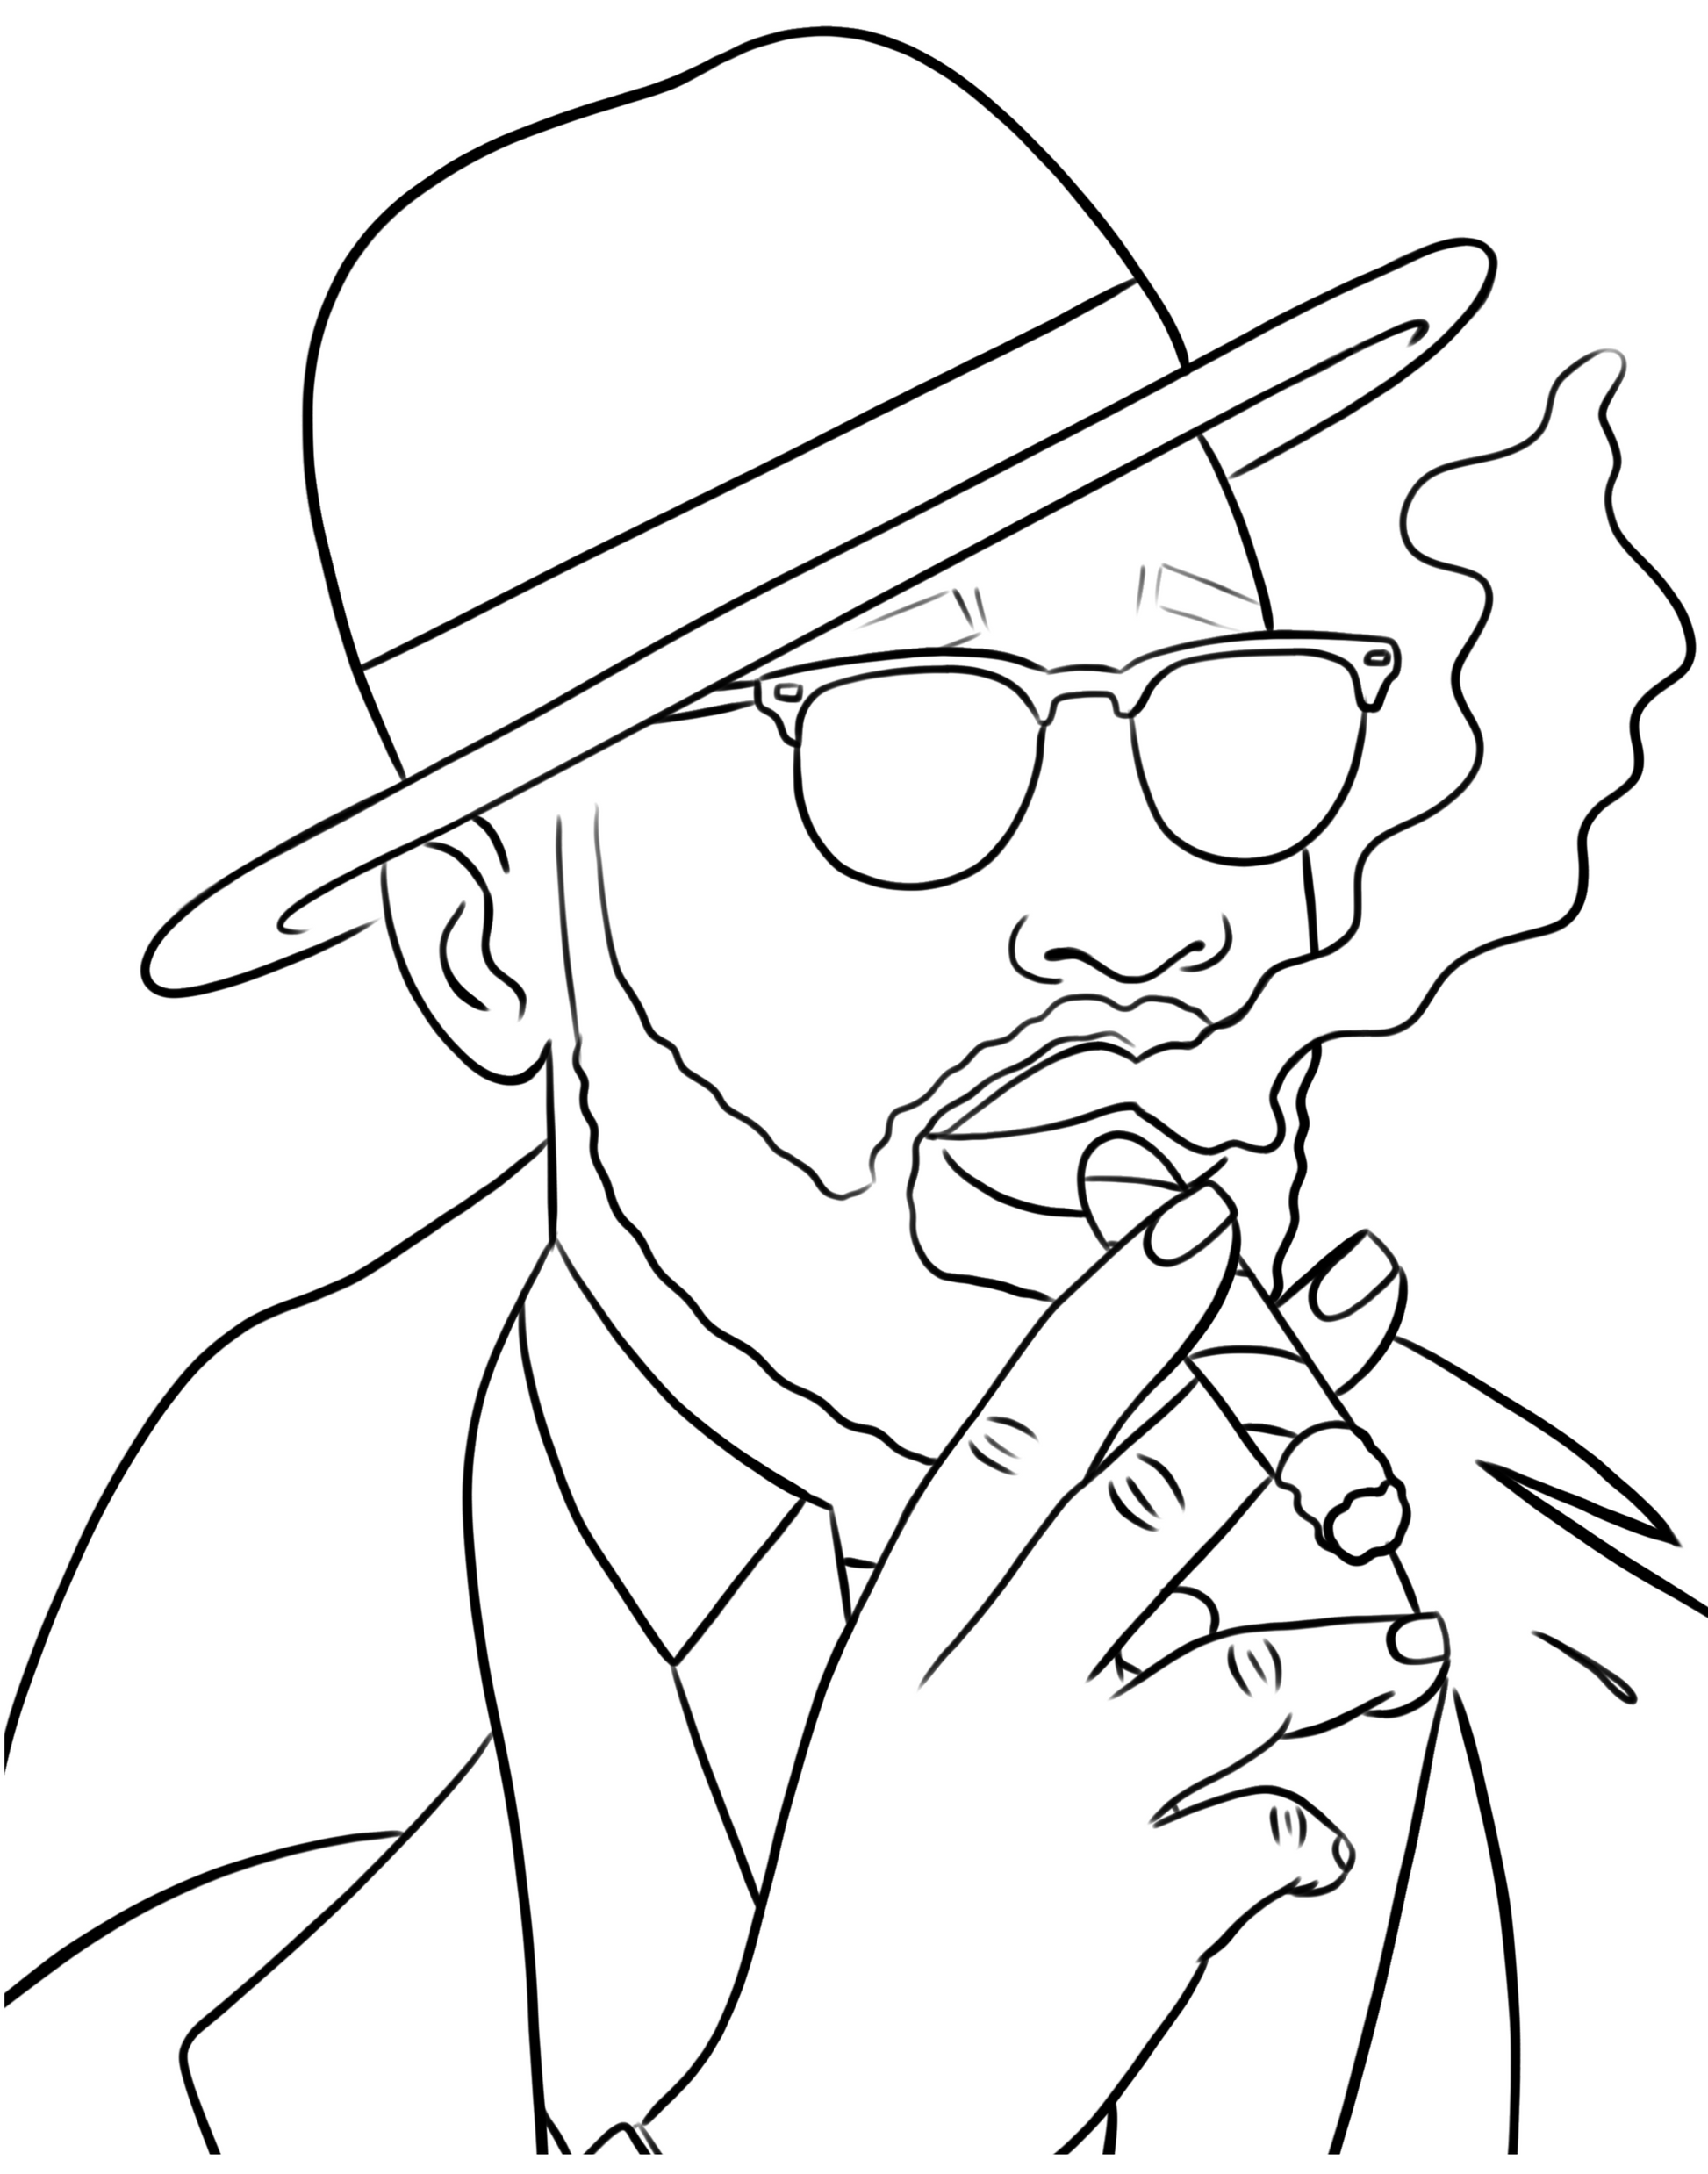 Predrawn Canvas Sketch Outline for DIY Sip Paint Party, Fedora Man